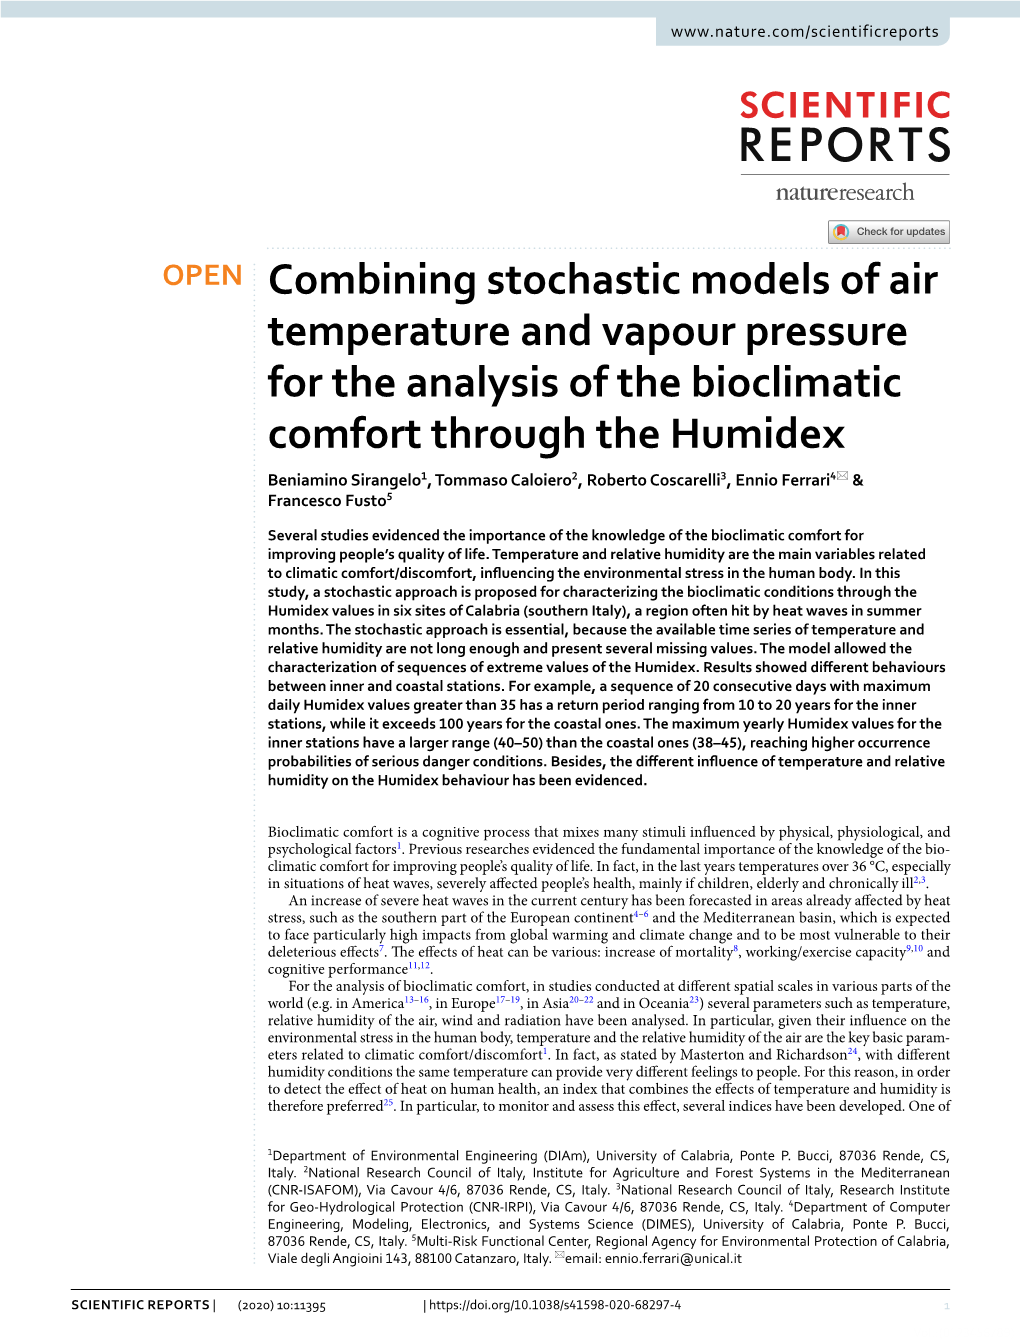 Combining Stochastic Models of Air Temperature and Vapour Pressure